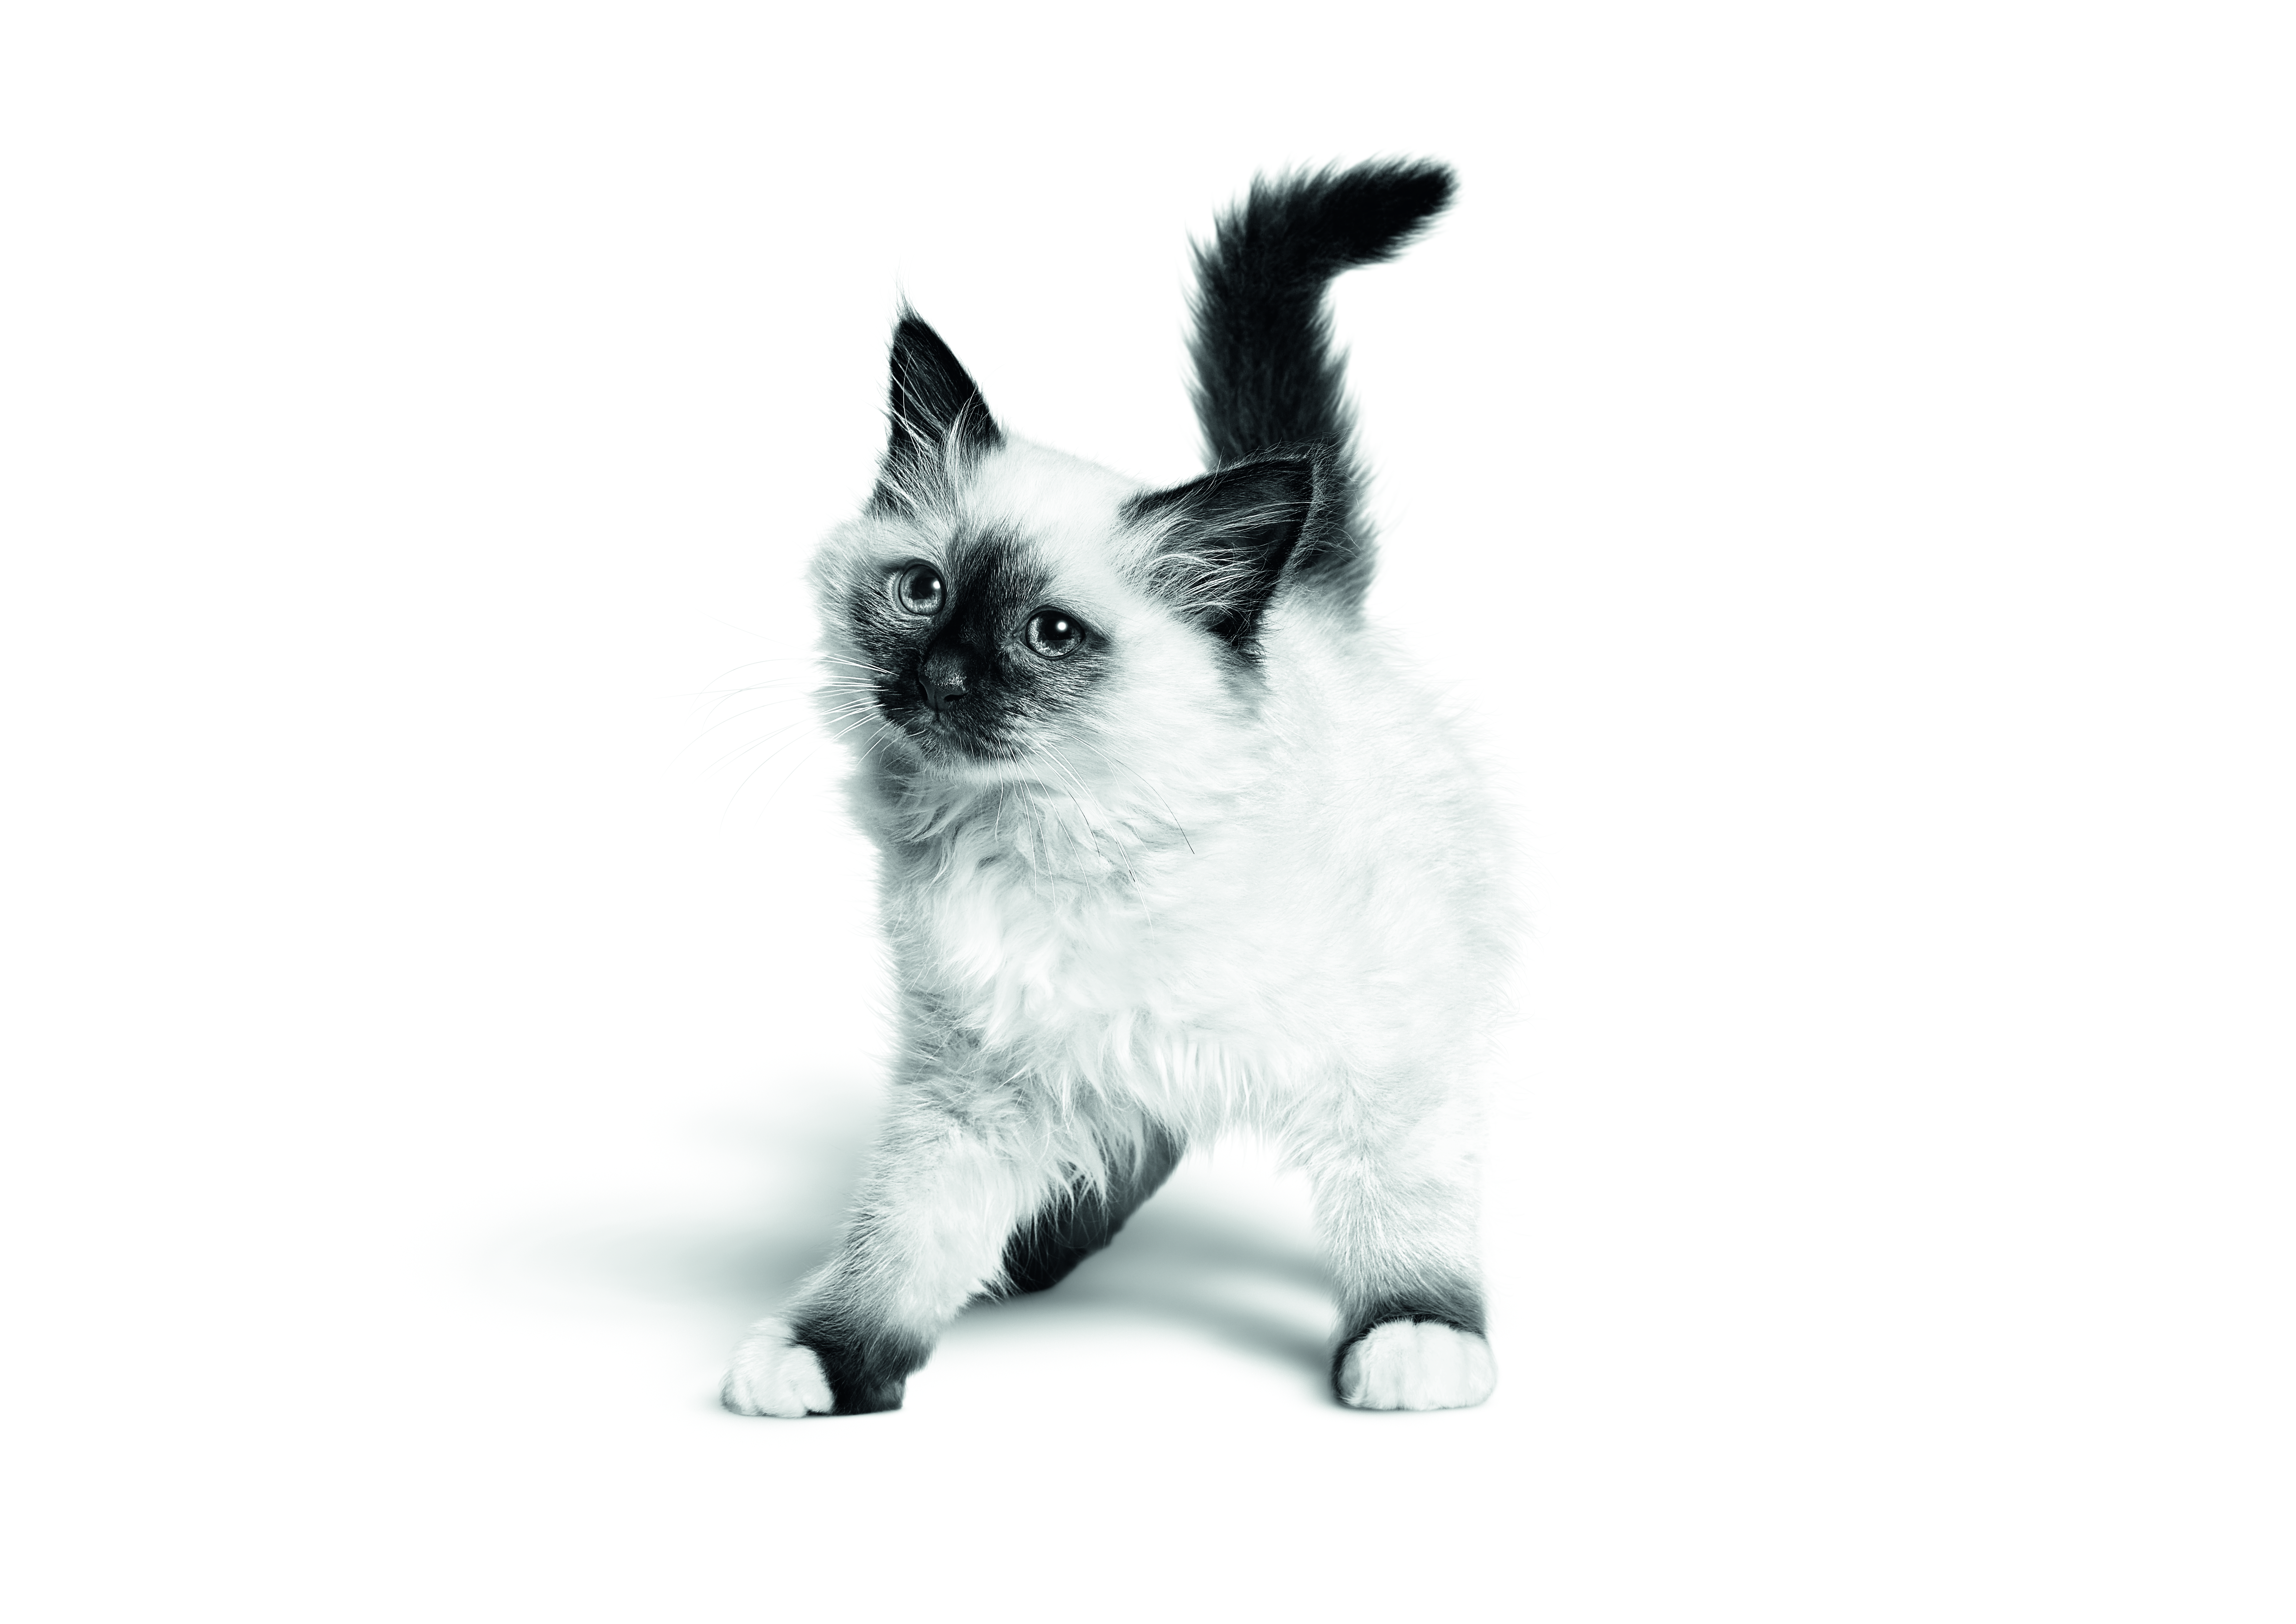 Sacred Birman kitten standing in black and white on a white background